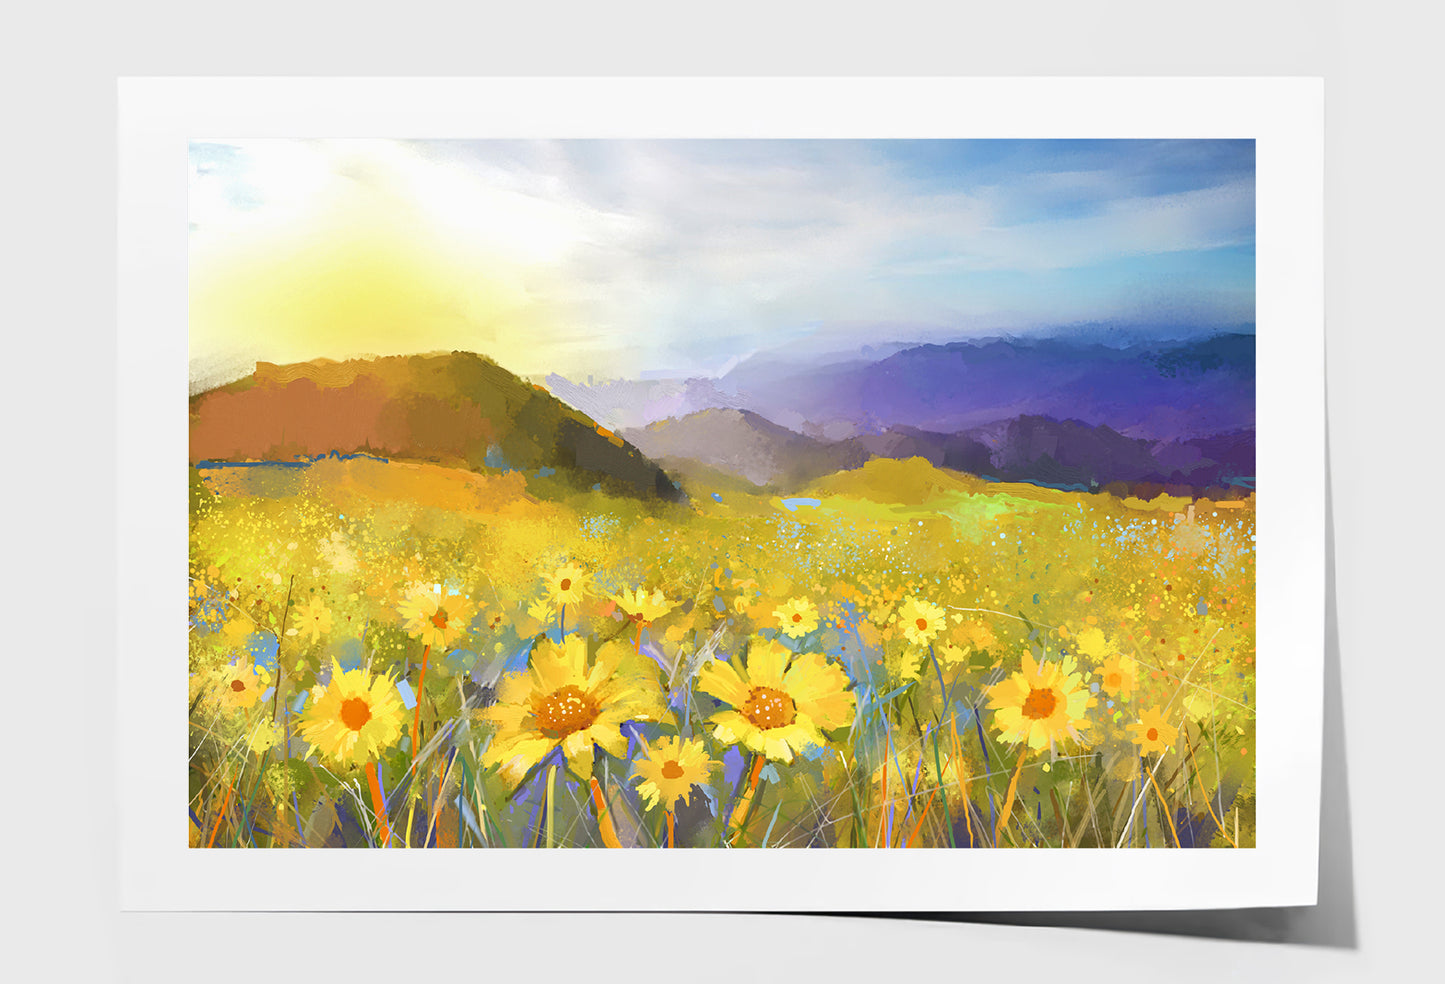 Daisy Flower Blossom, Warm Light Of The Sunset & Hill Oil Painting Limited Edition High Quality Print Unframed Roll Canvas None